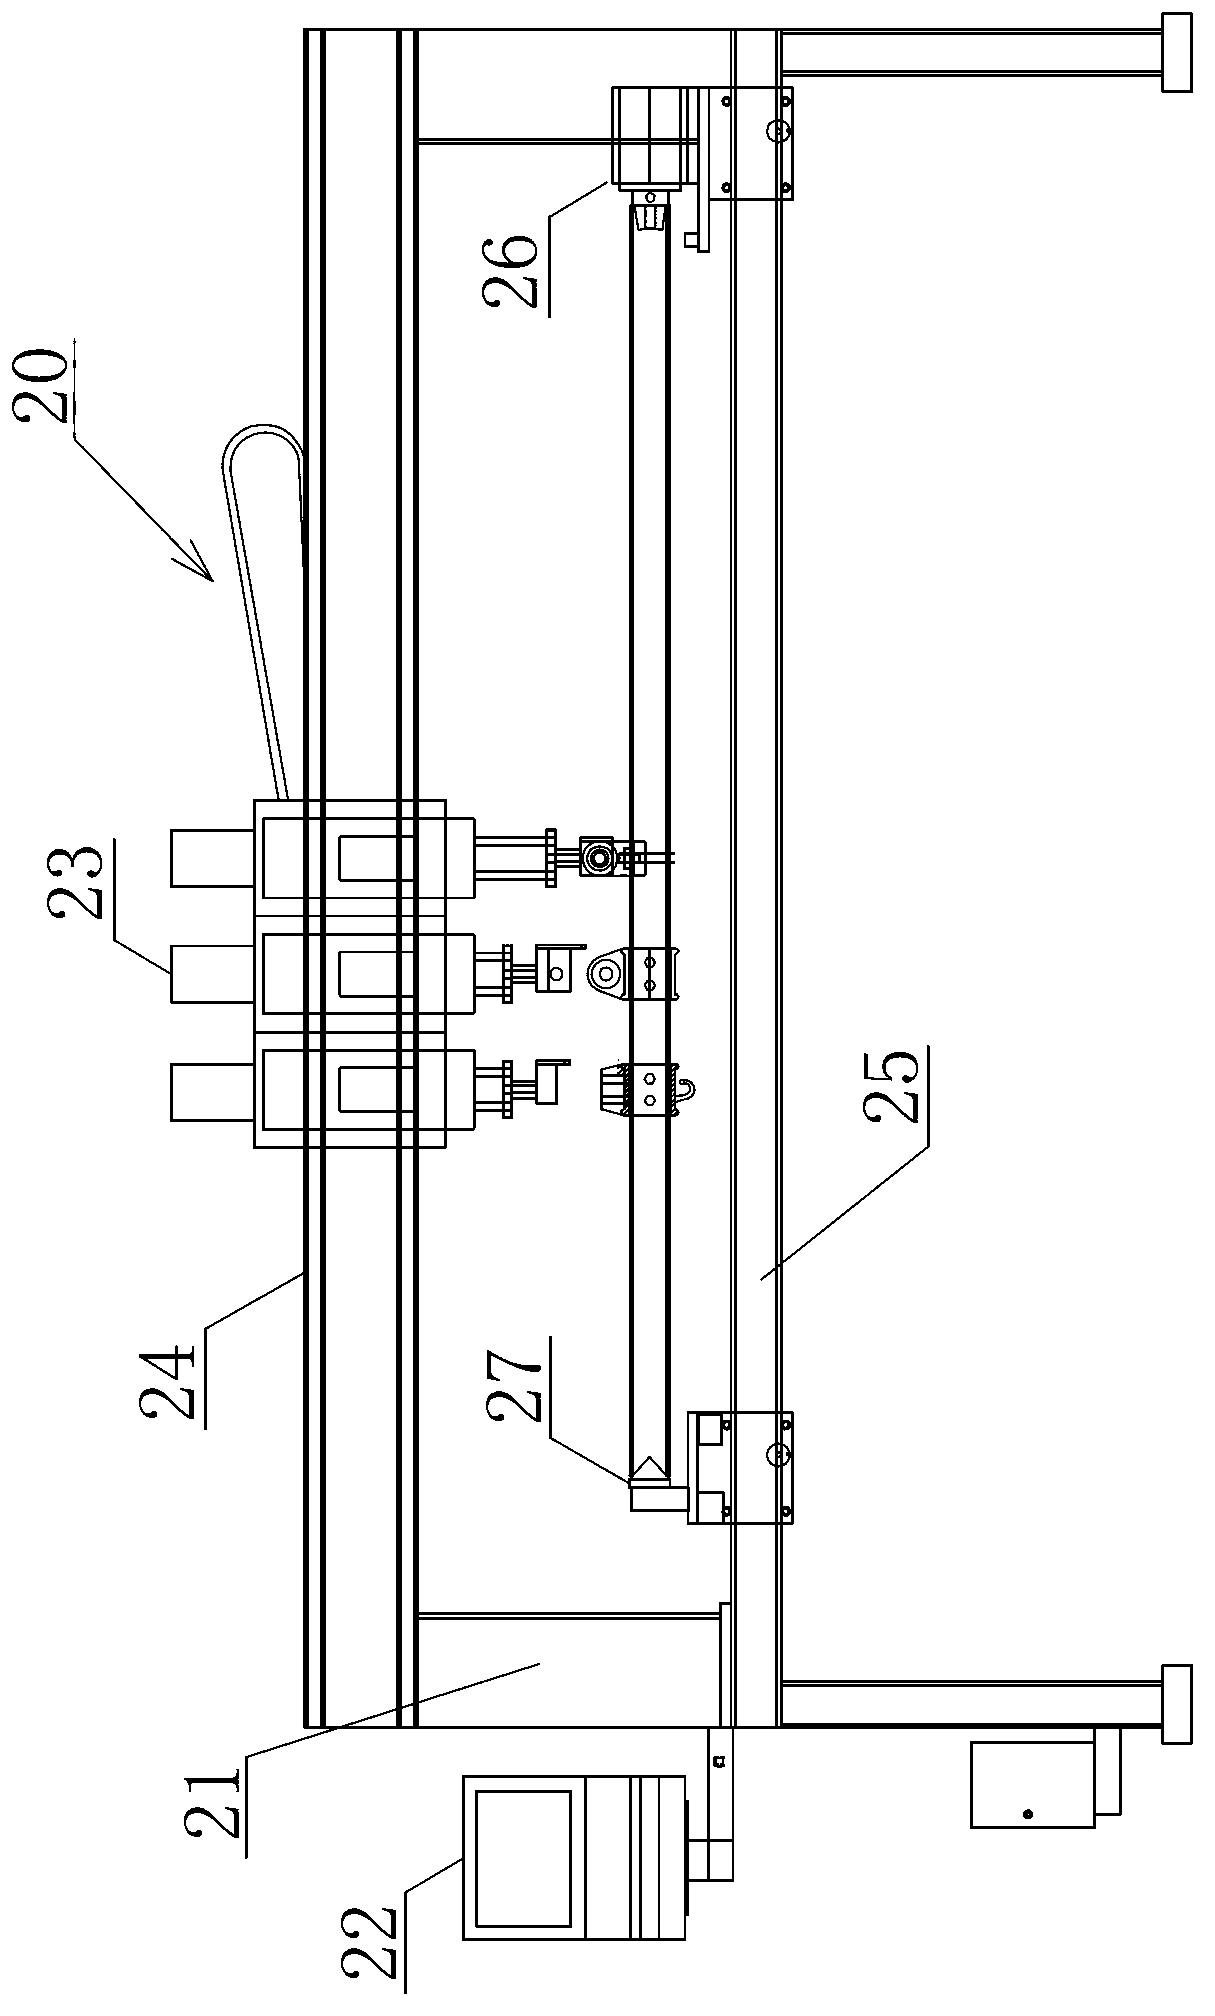 Catenary cantilever numerical control preassembly platform